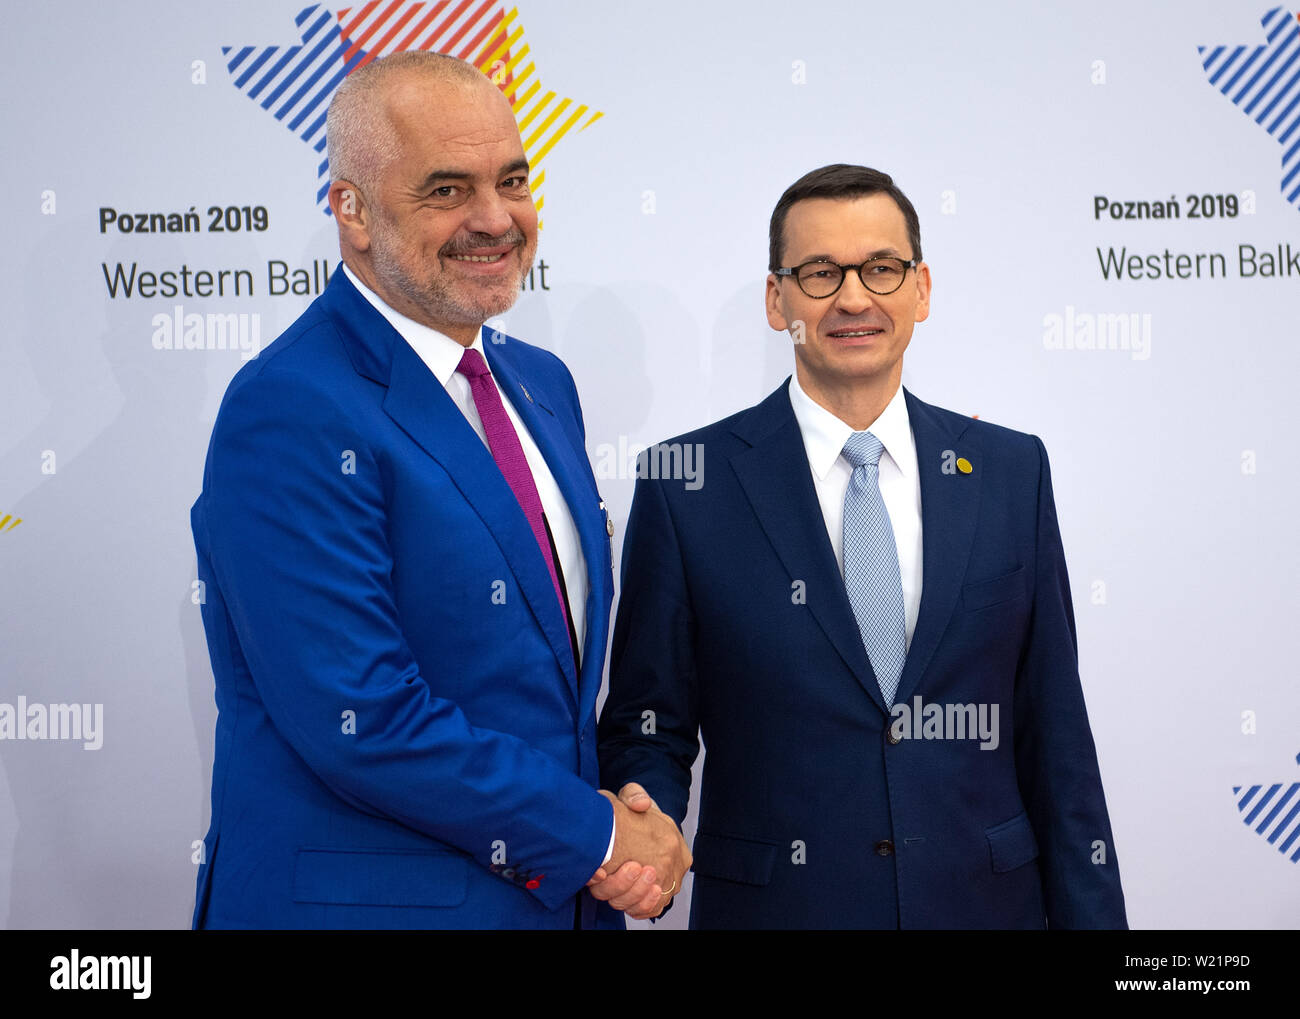 Poznan, Poland. 05th July, 2019. Edi Rama (l), Prime Minister of Albania, is welcomed by Mateusz Morawiecki, Prime Minister of Poland, on his arrival at the Western Balkans Summit. The aim of the Summit is to assist the Balkan countries on their way to possible future membership of the European Union. Credit: Monika Skolimowska/dpa-Zentralbild/dpa/Alamy Live News Stock Photo